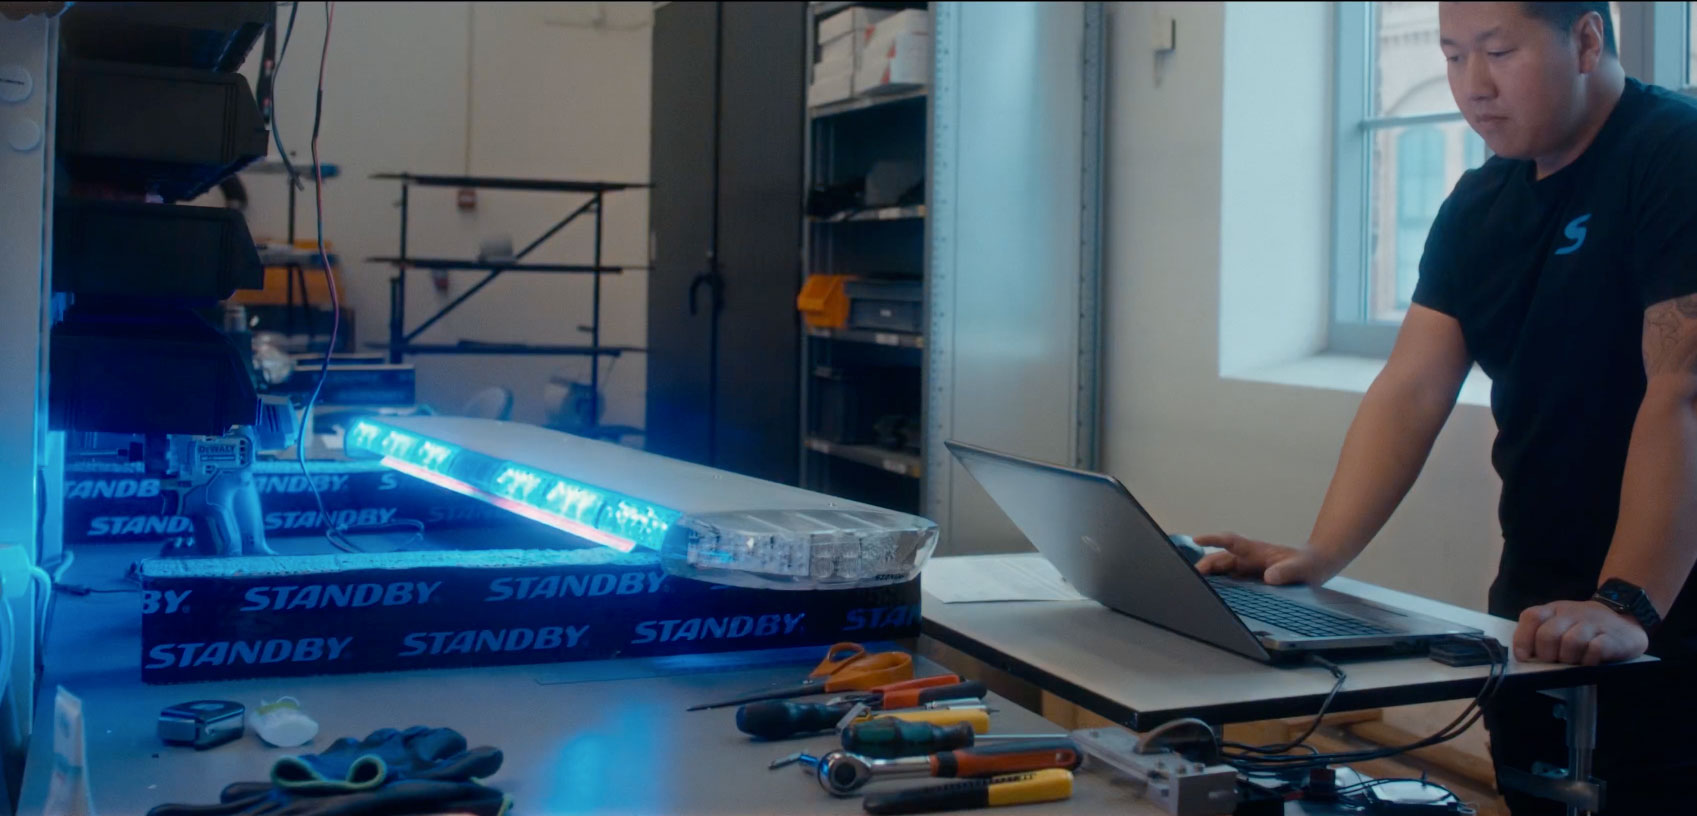 Hero Image Lightbar Engineer operates a laptop next to the W3 lightbar which is lit blue. Various tools are lined up on the bench in front of them